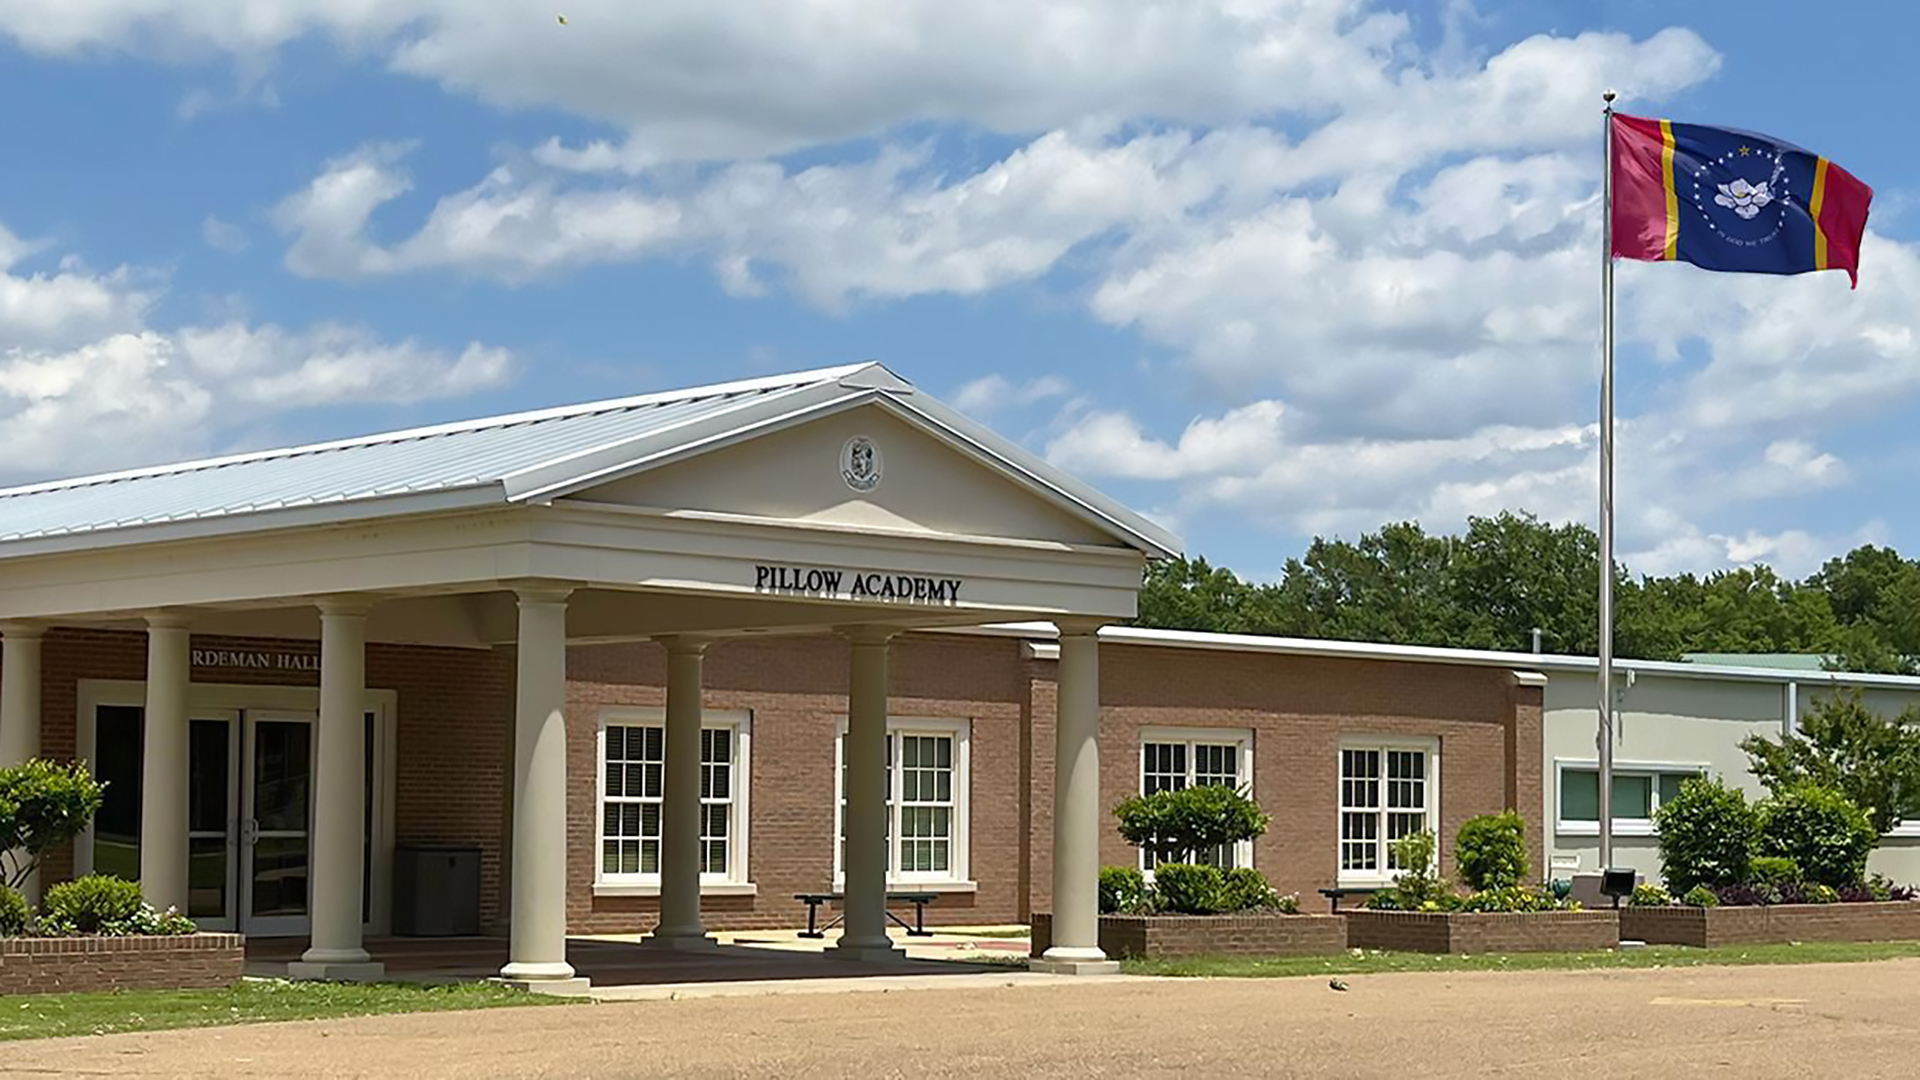 Pillow Academy in Greenwood, Mississippi, which Ellen Ann Fentress entered in 1970 as a eighth-grader.